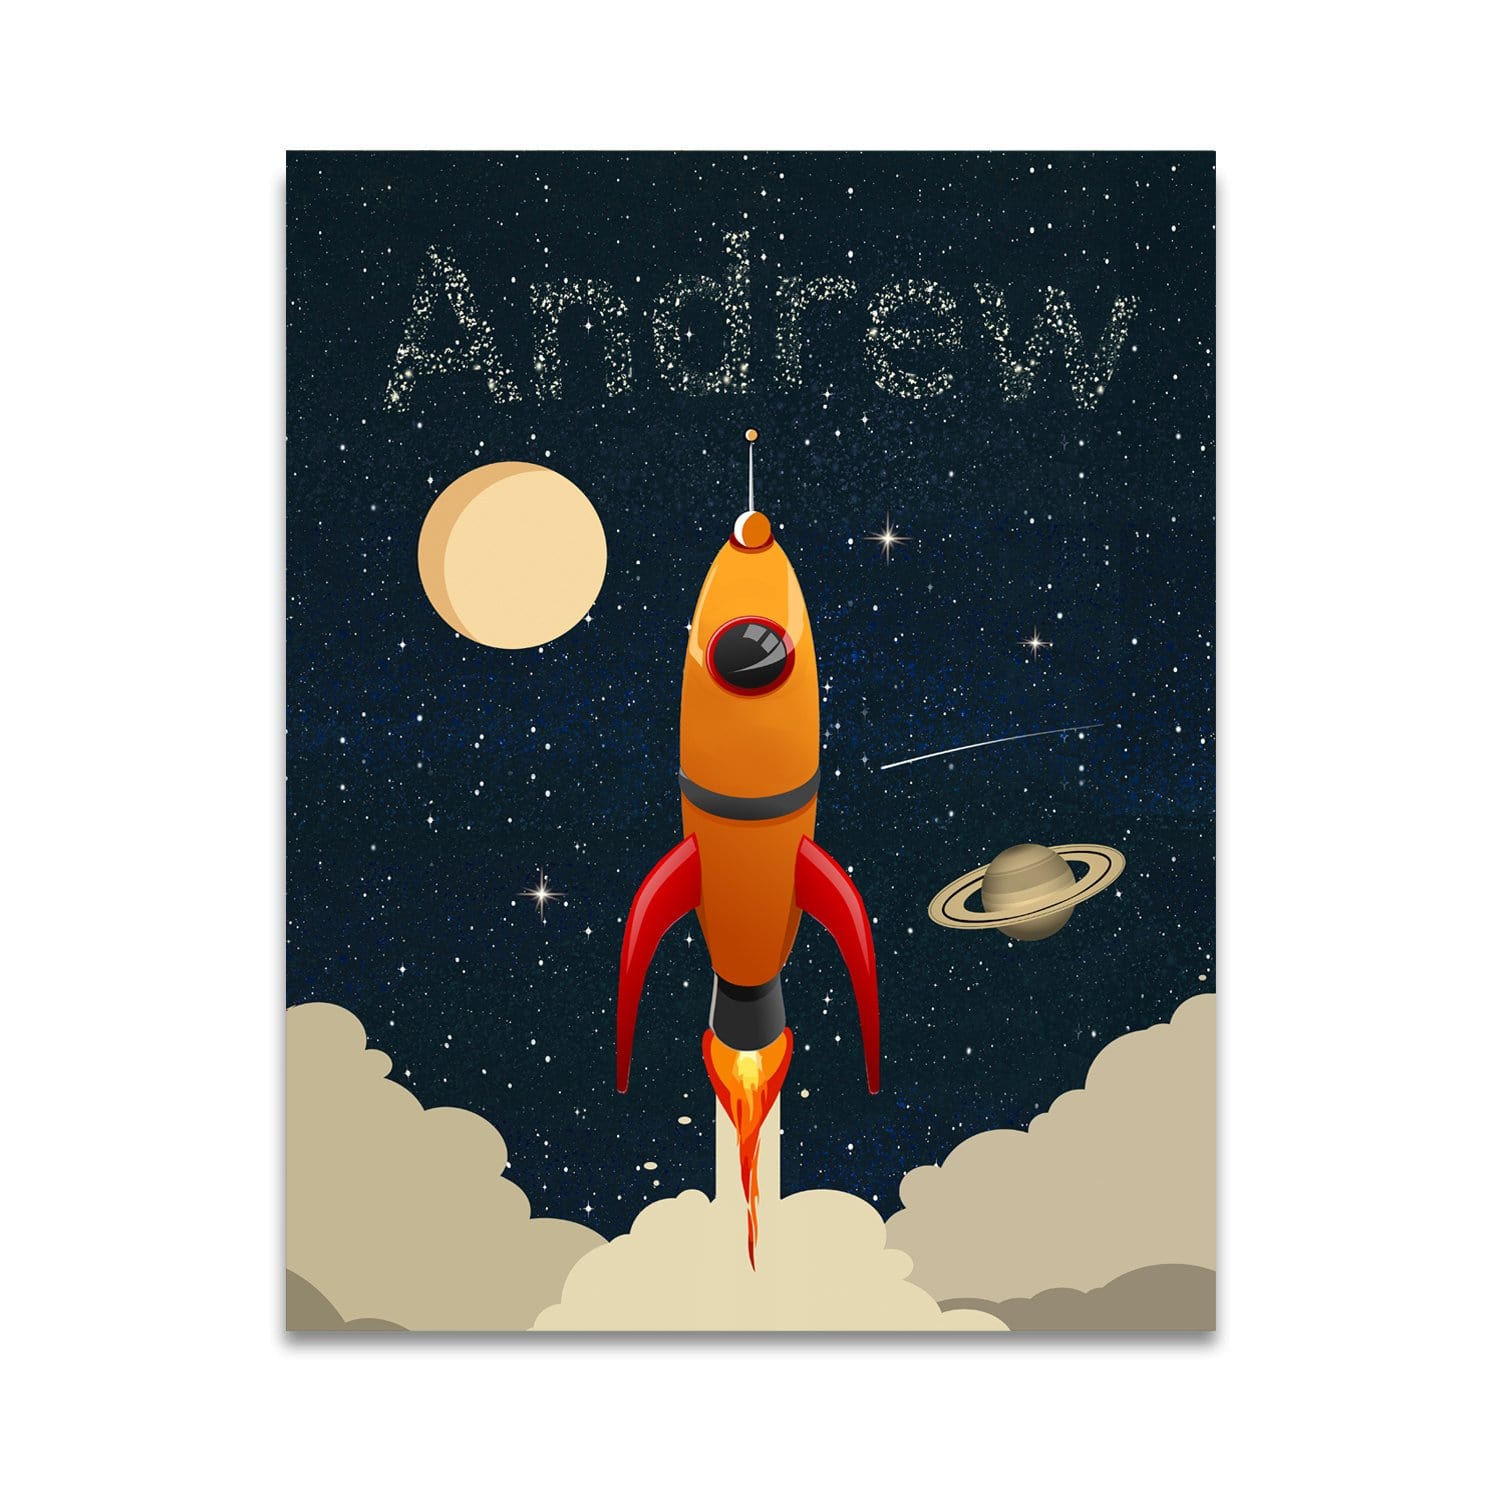 Personalized spaceship kids art personalized with their name written in the stars